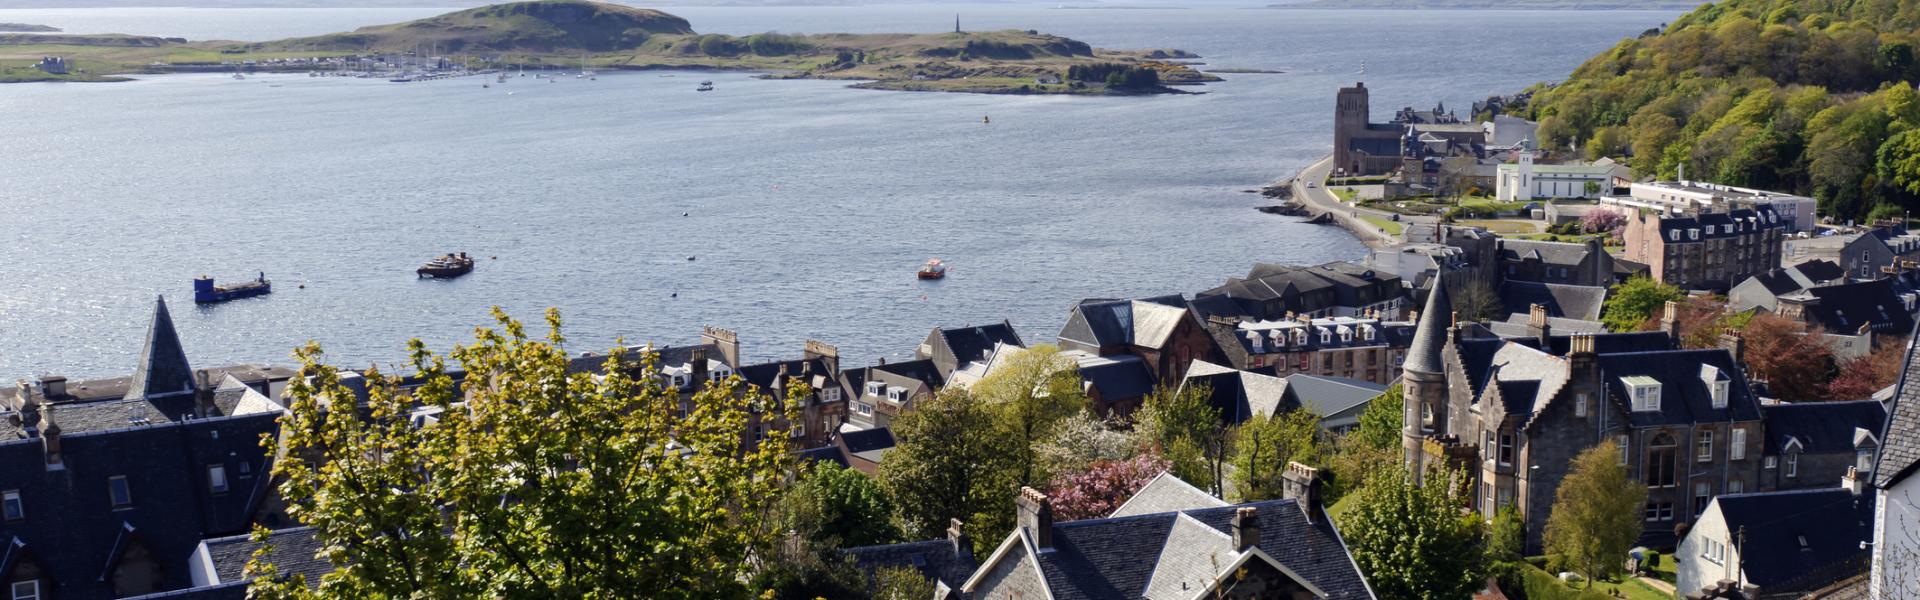 Holiday Cottages & Accommodation in Oban - HomeToGo